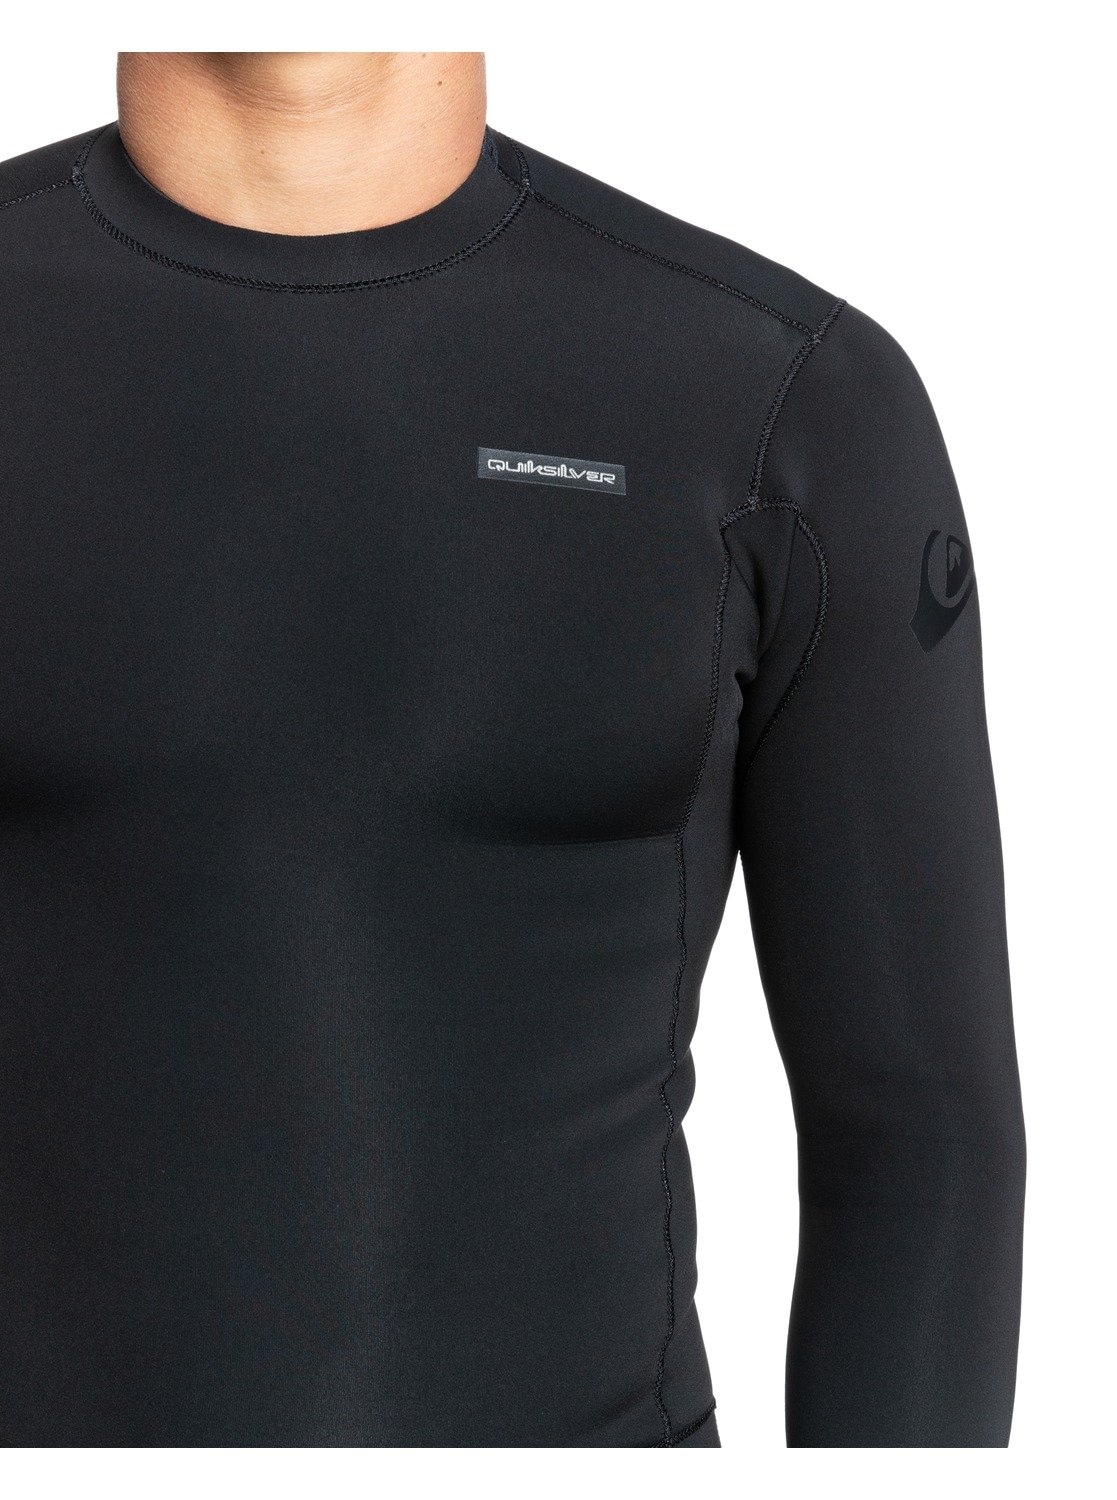 Everyday Neoprenanzug Quiksilver bei ♕ »2mm Sessions«